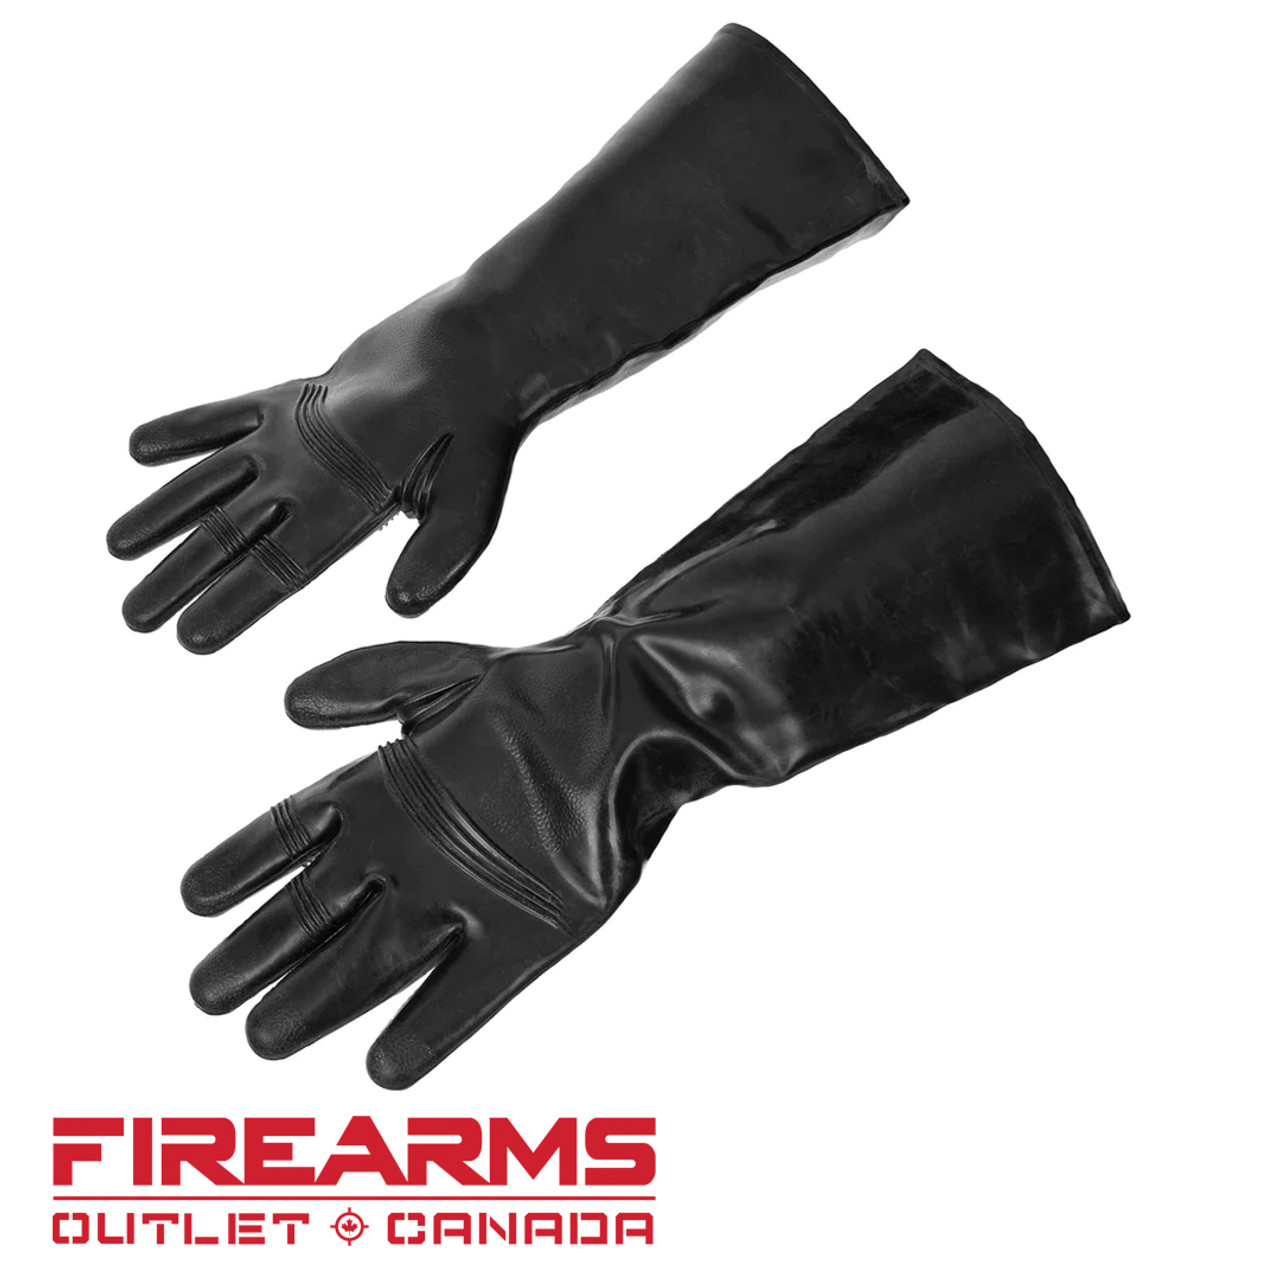 MIRA Safety NC-11 Protective CBRN Gloves - Small [NC11GLOVESM]